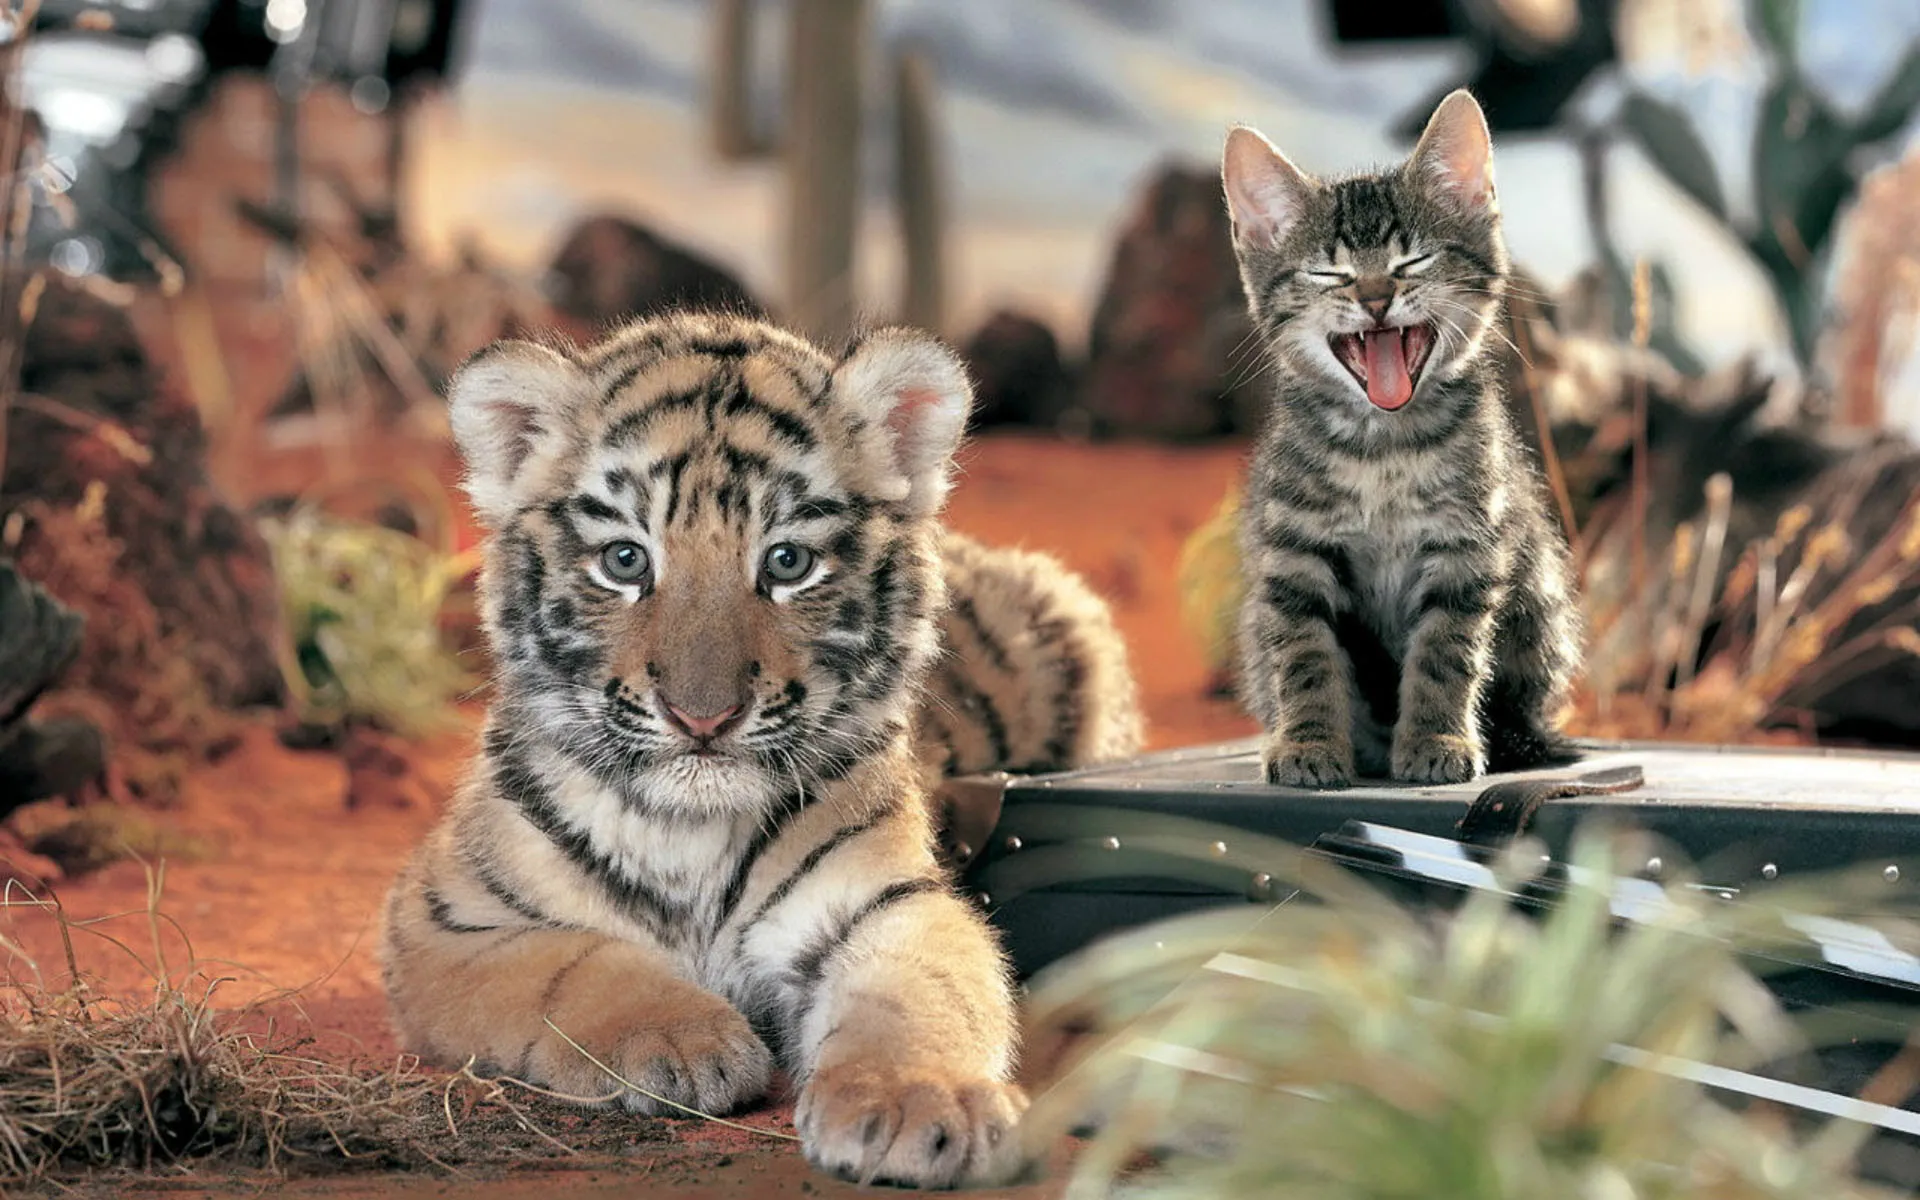 Tiger and Kitten